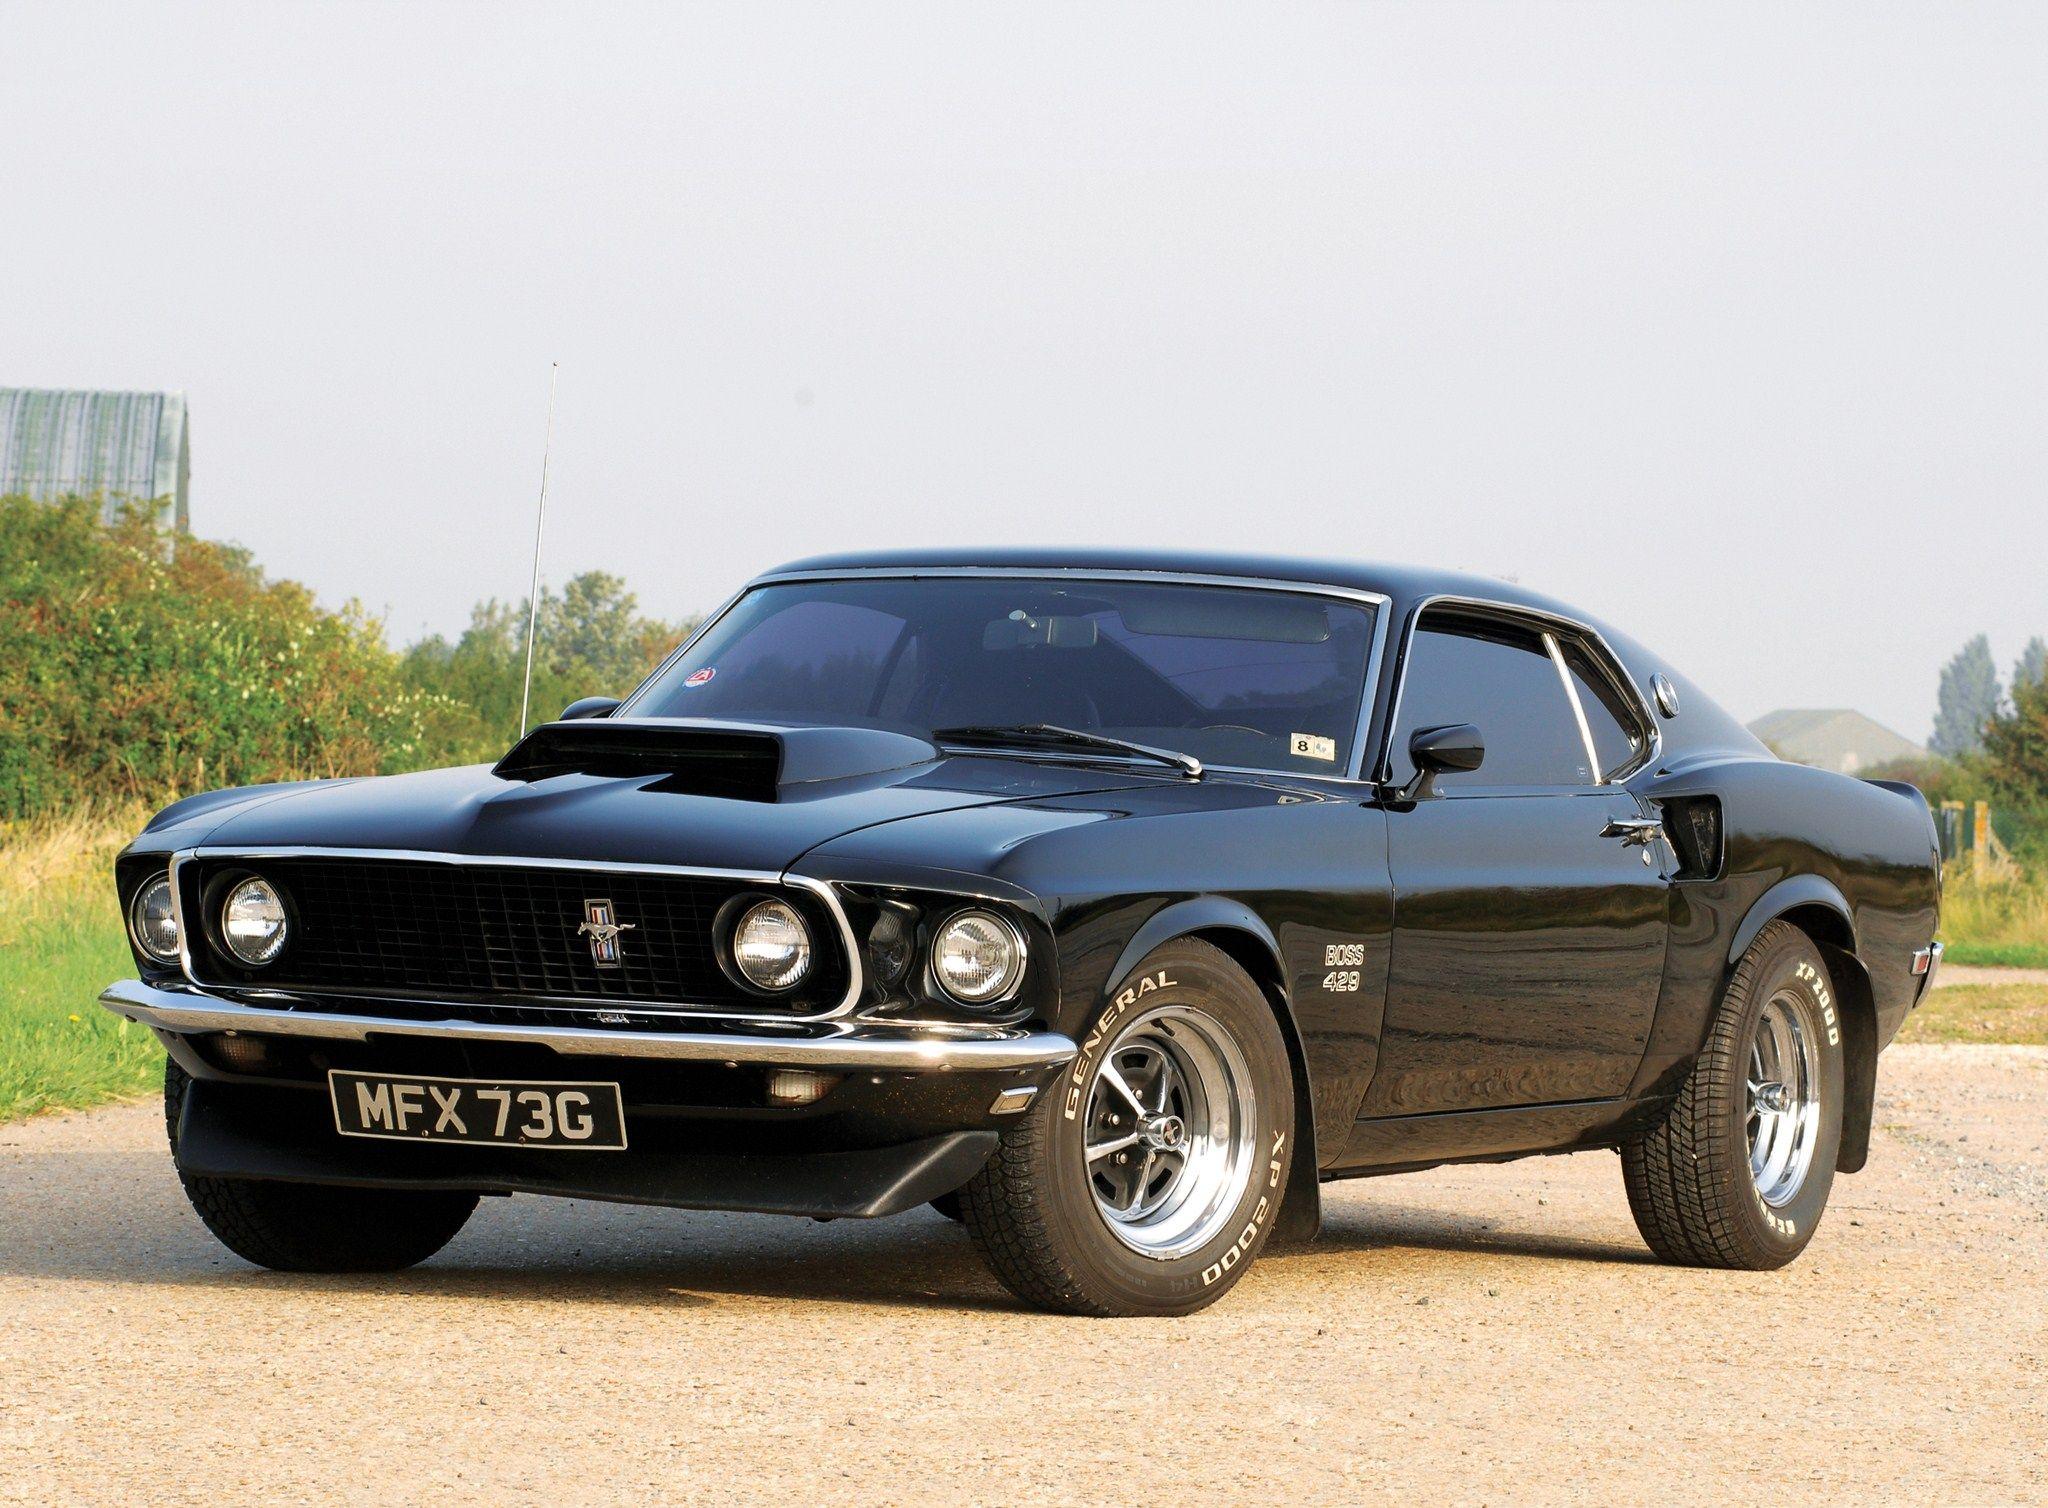 Ford Mustang Boss 429 Fastback